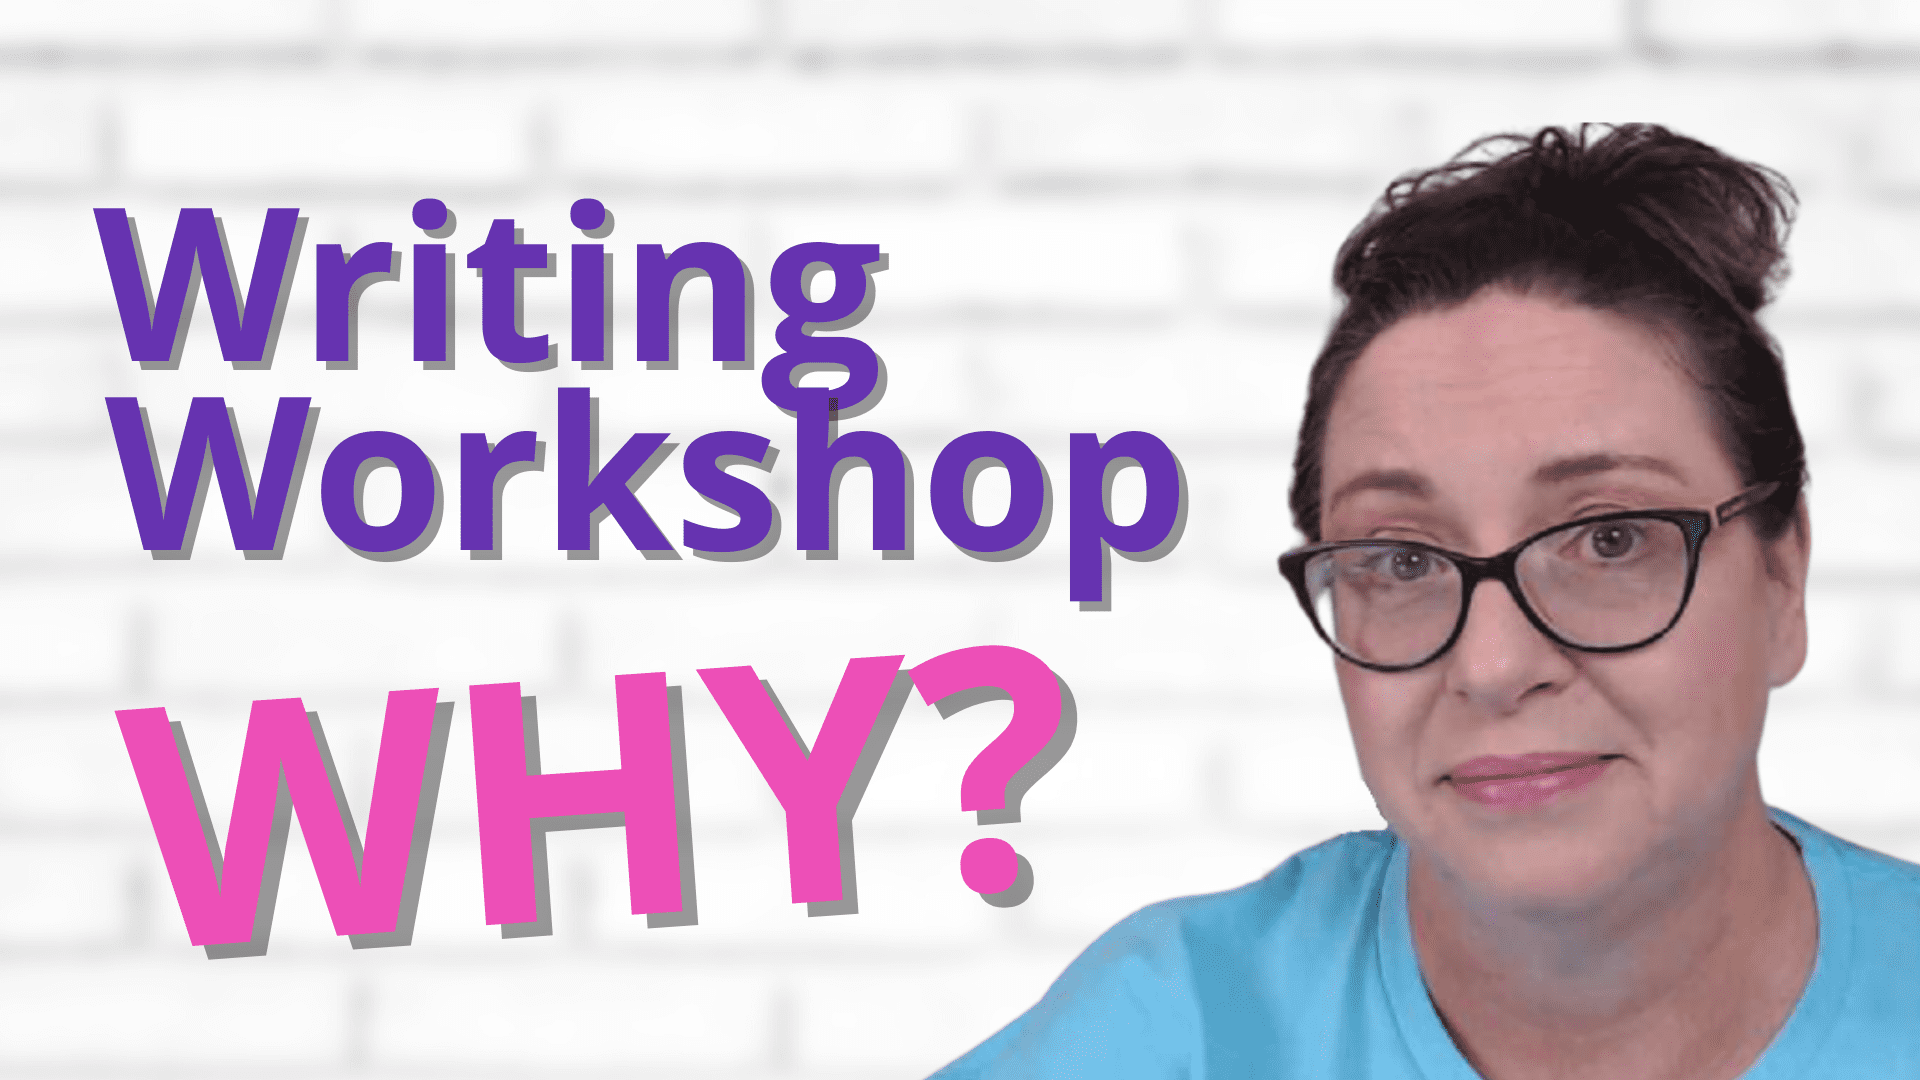 Writing Workshop Why is the title of the youtube video that is pictured with Kathie Harsch the creator of the channel